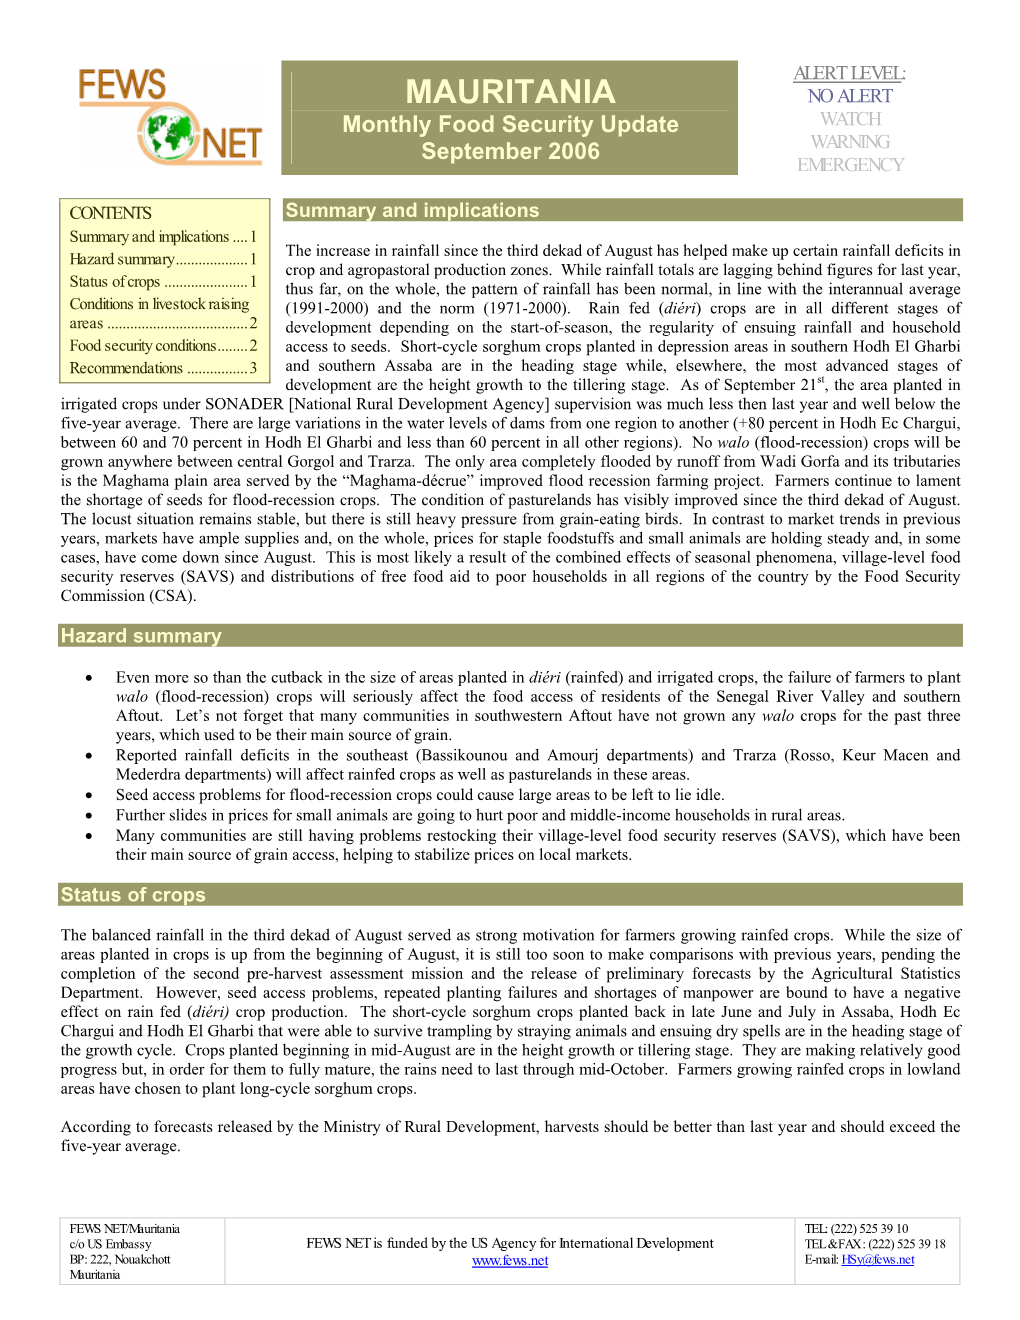 Mauritania Monthly Food Security Update, September 2006